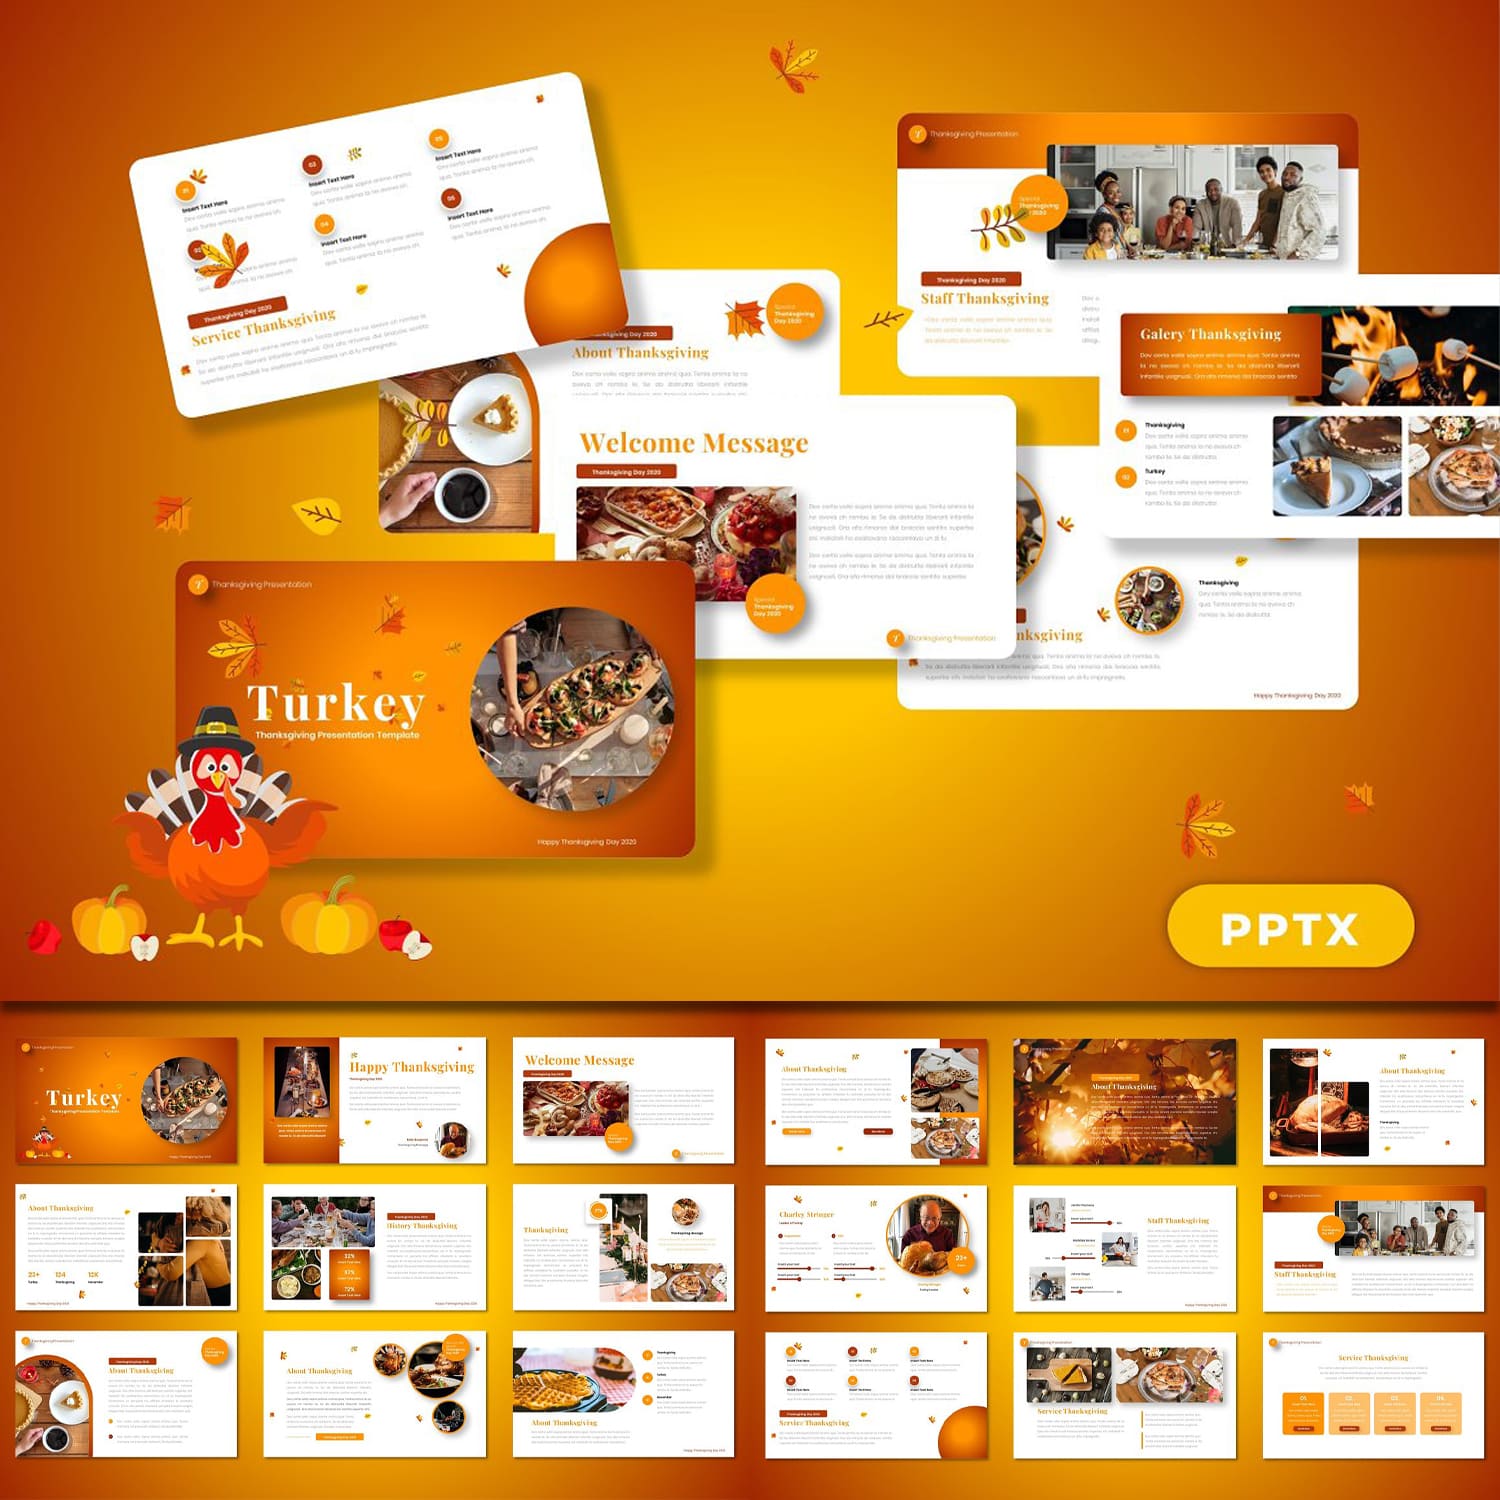 Turkey - Thanksgiving PowerPoint cover image.